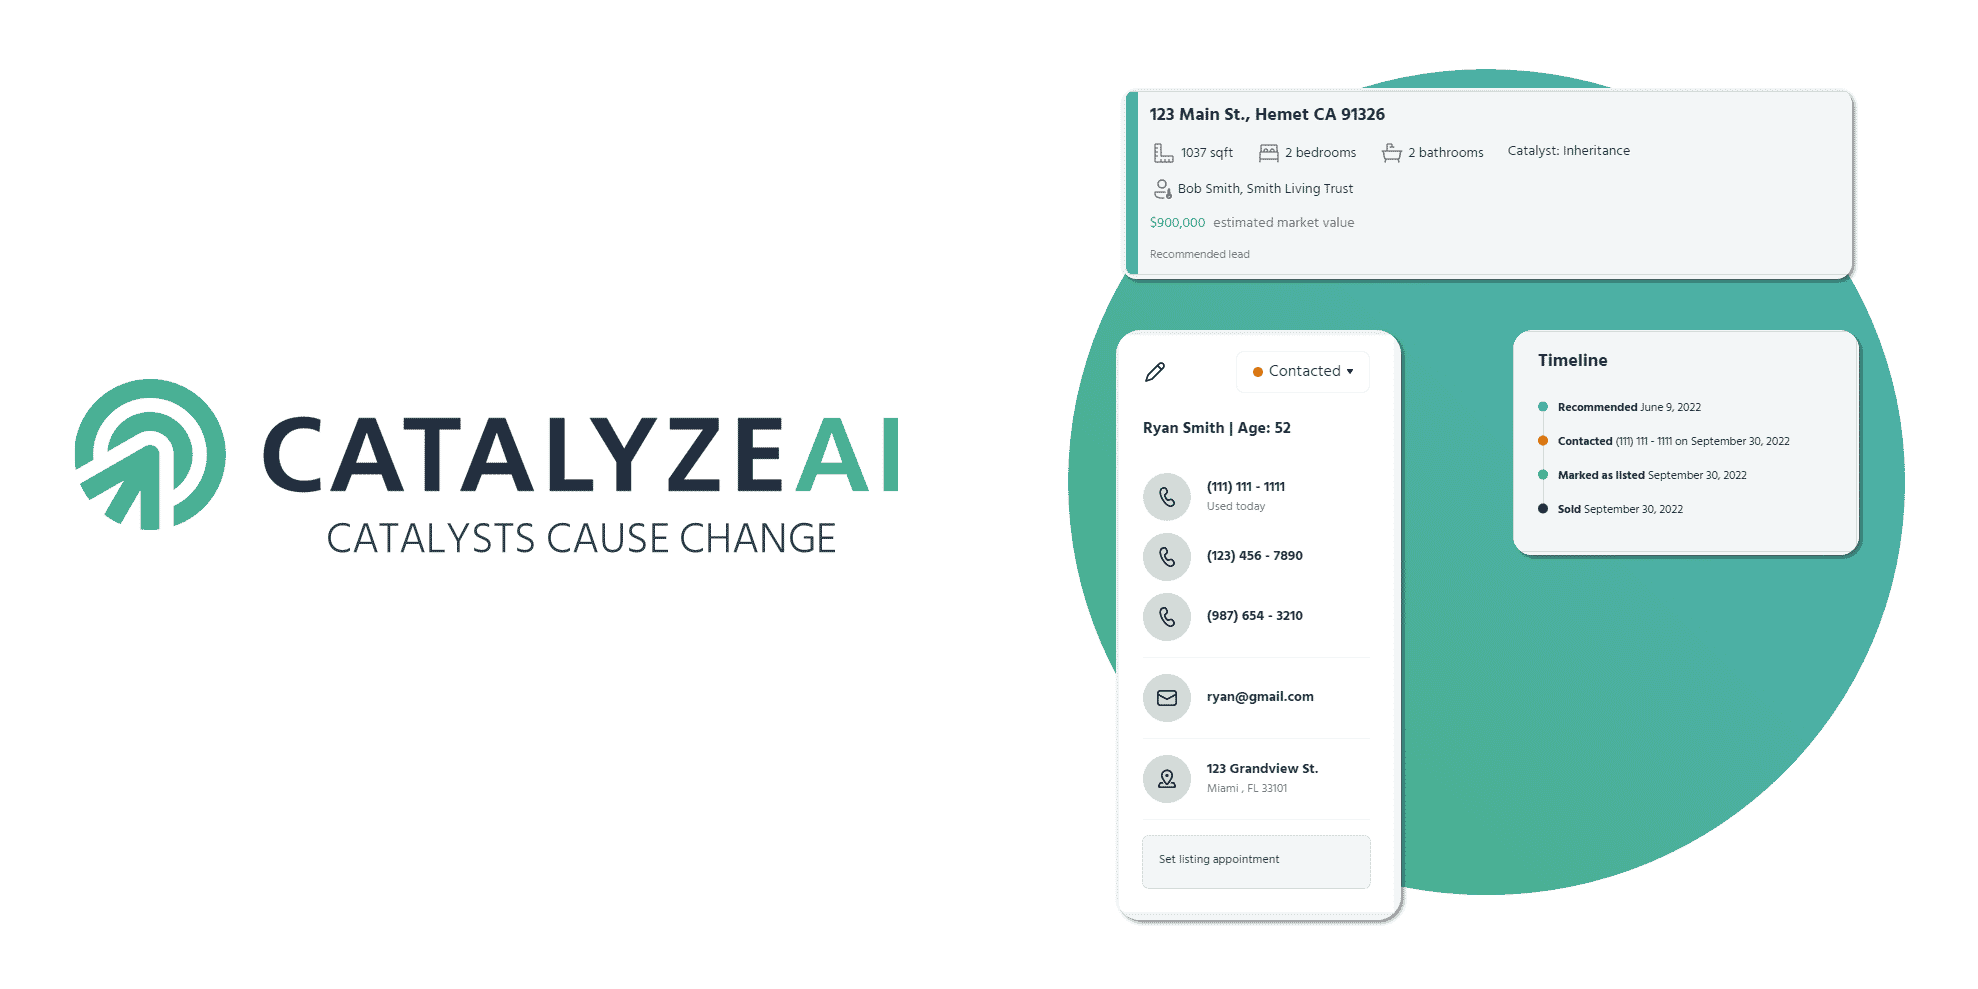 contact view in real estate lead generation company Catalyze AI